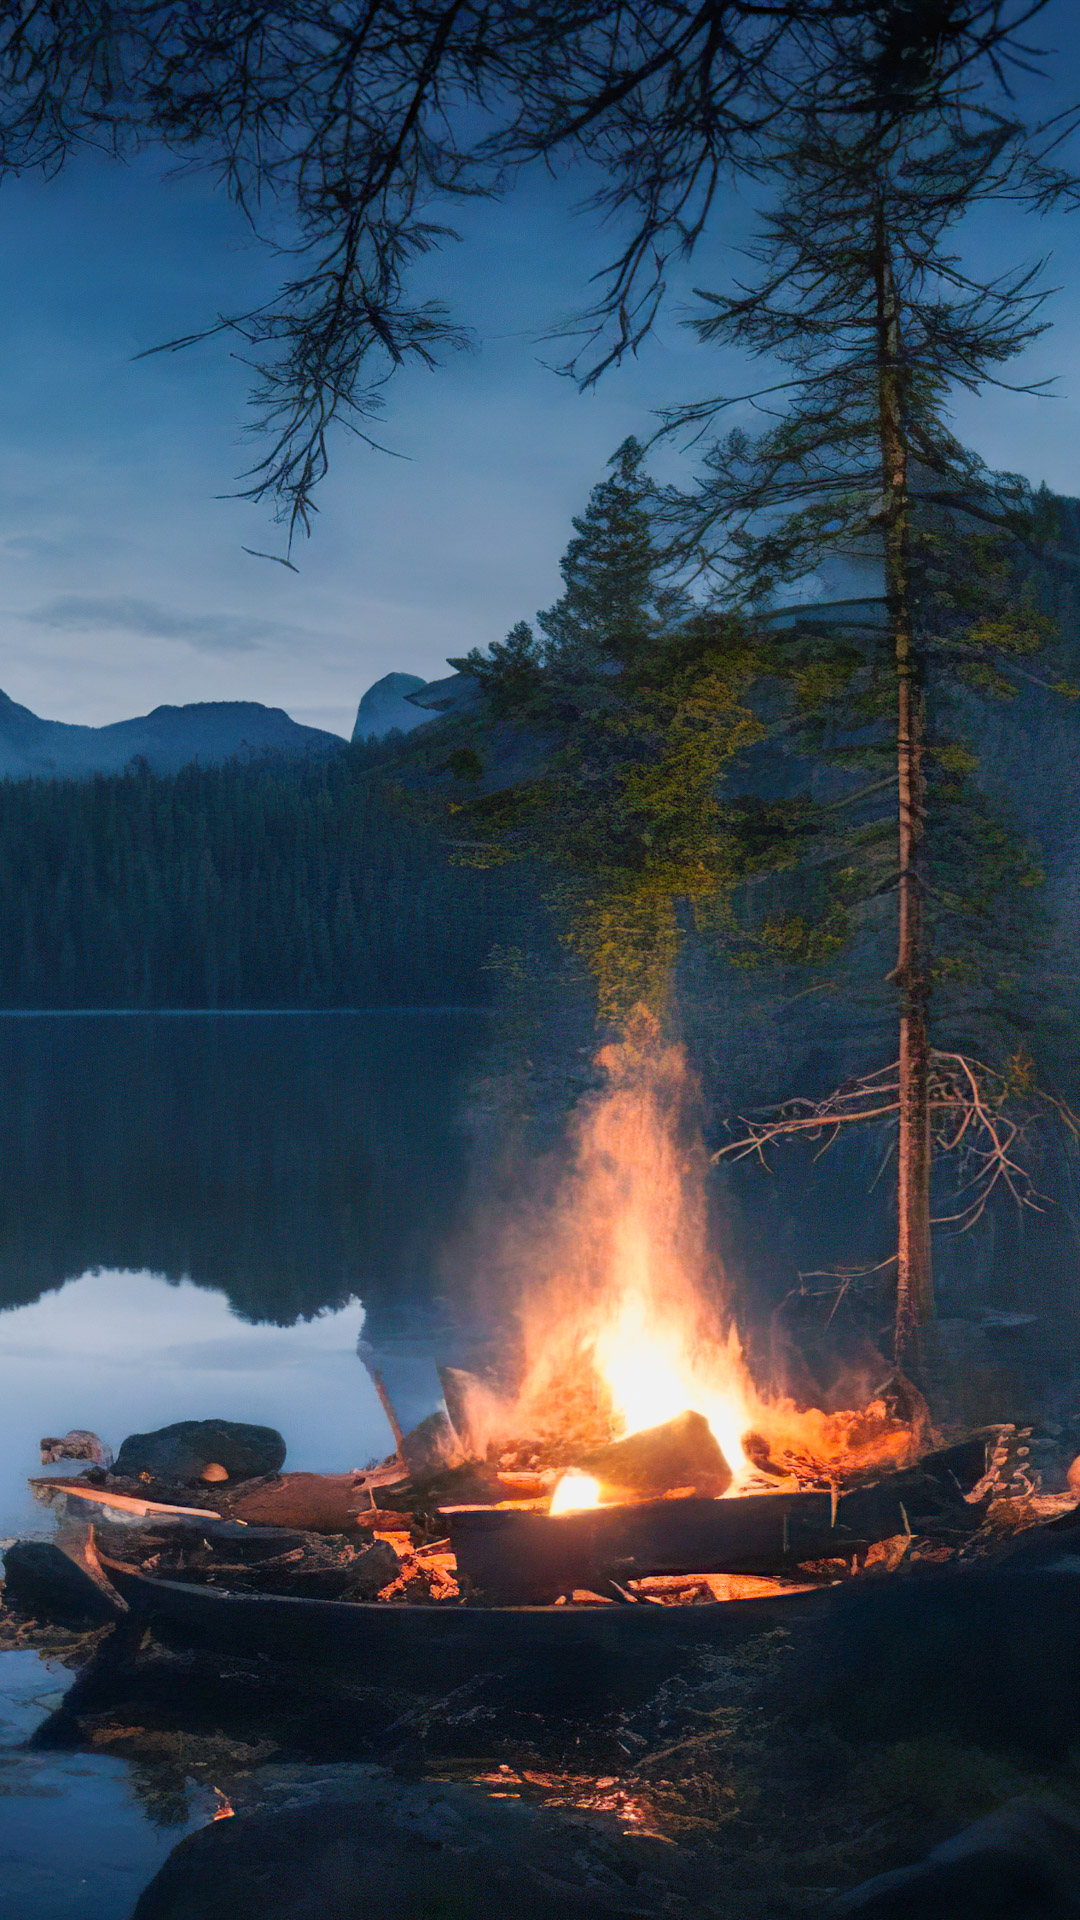 Adorn your iPhone with our high-quality nature wallpaper, showcasing a serene lakeside campsite with a flickering campfire, surrounded by a dark, wooded wilderness.